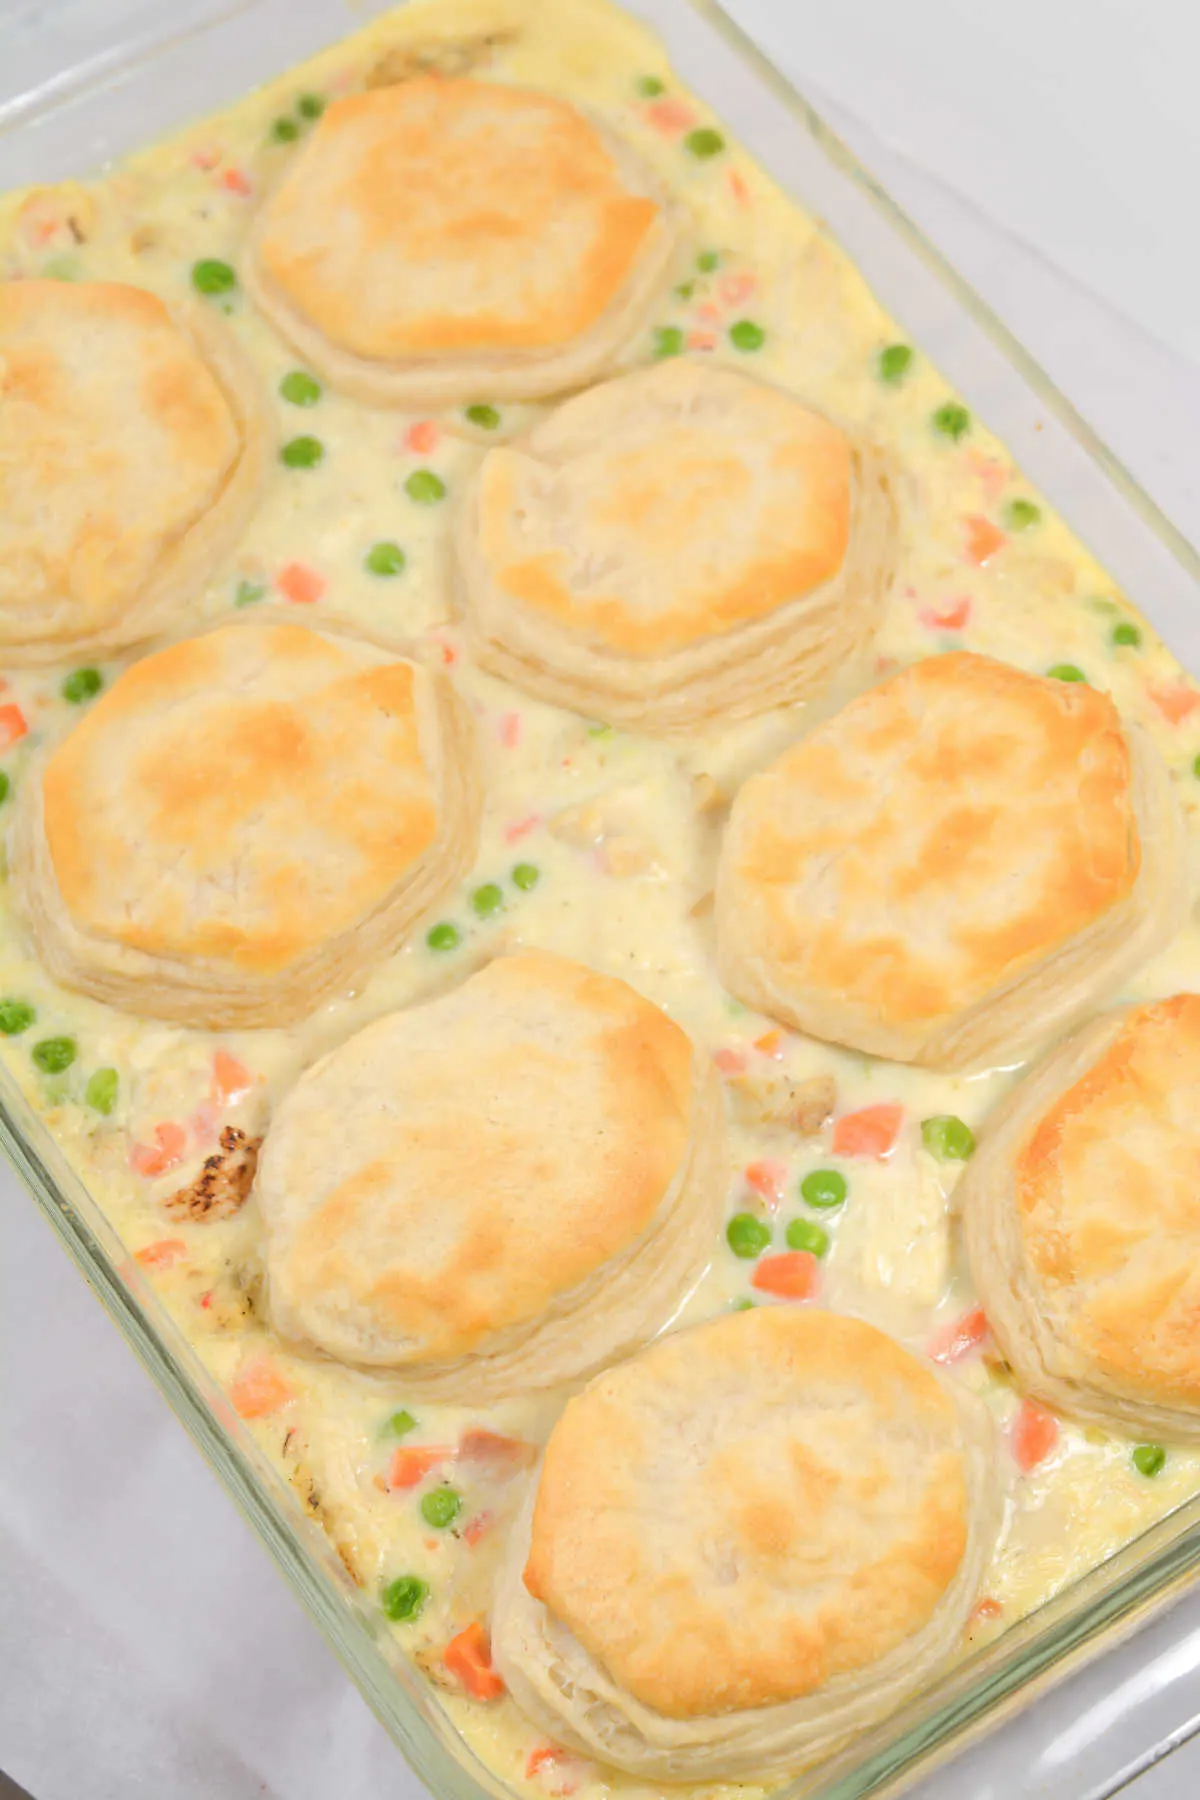 Creamy chicken pot pie mixture topped with golden brown biscuits fresh from the oven.